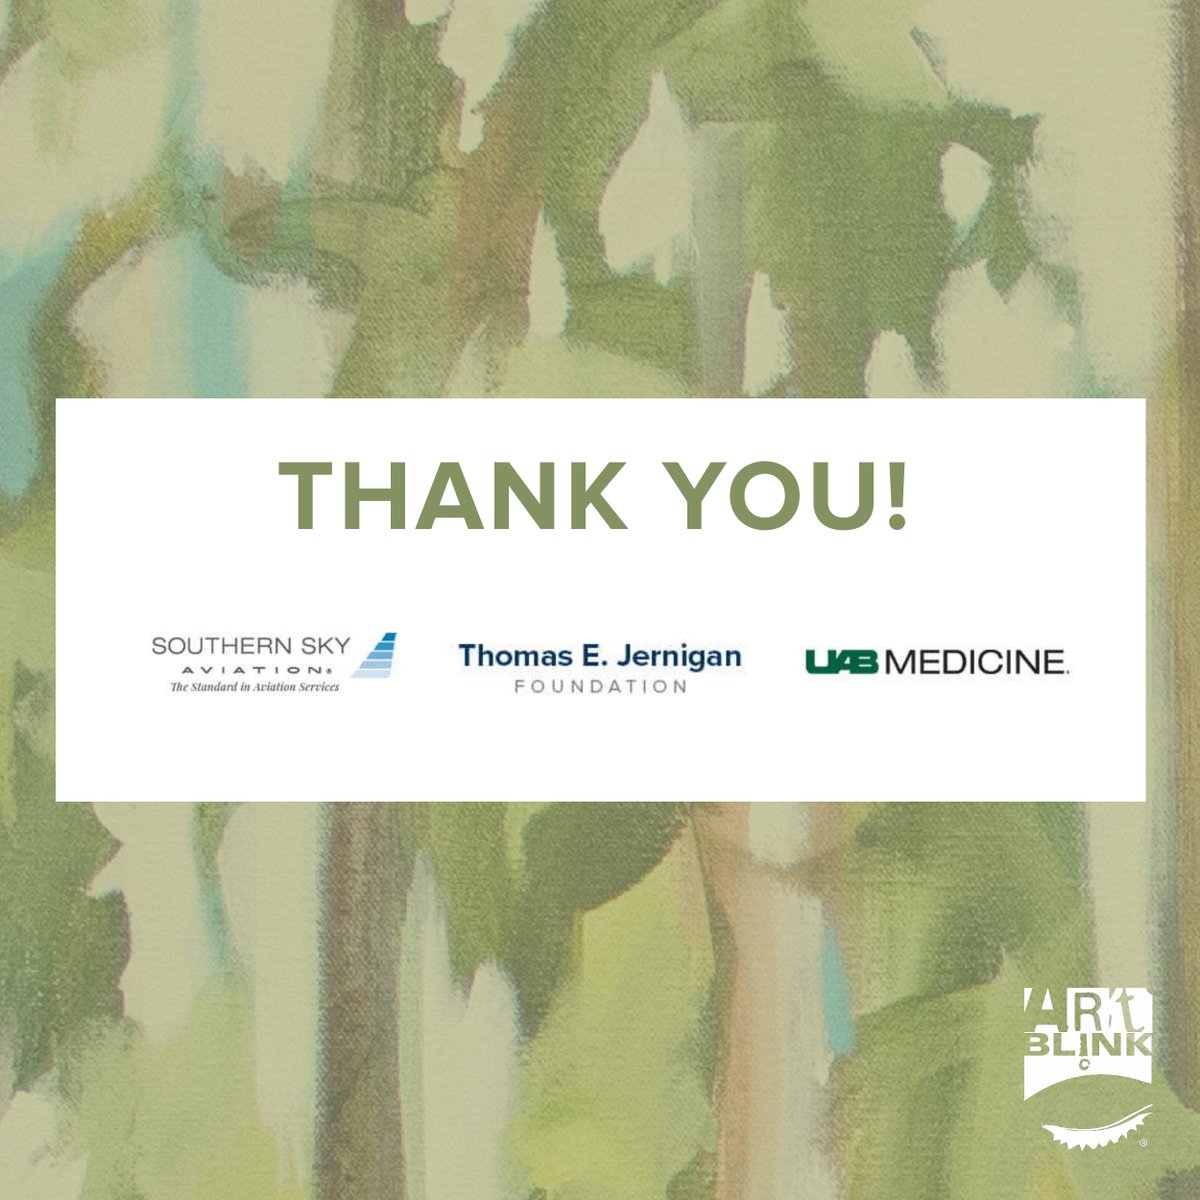 Thank you to Southern Sky Aviation, the Thomas E. Jernigan Foundation and @uabmedicine for partnering with us to present #ArtBLINK2023. 

Your support makes ArtBLINK possible and furthers the Cancer Center's mission of advancing the understanding of cancer for all people.